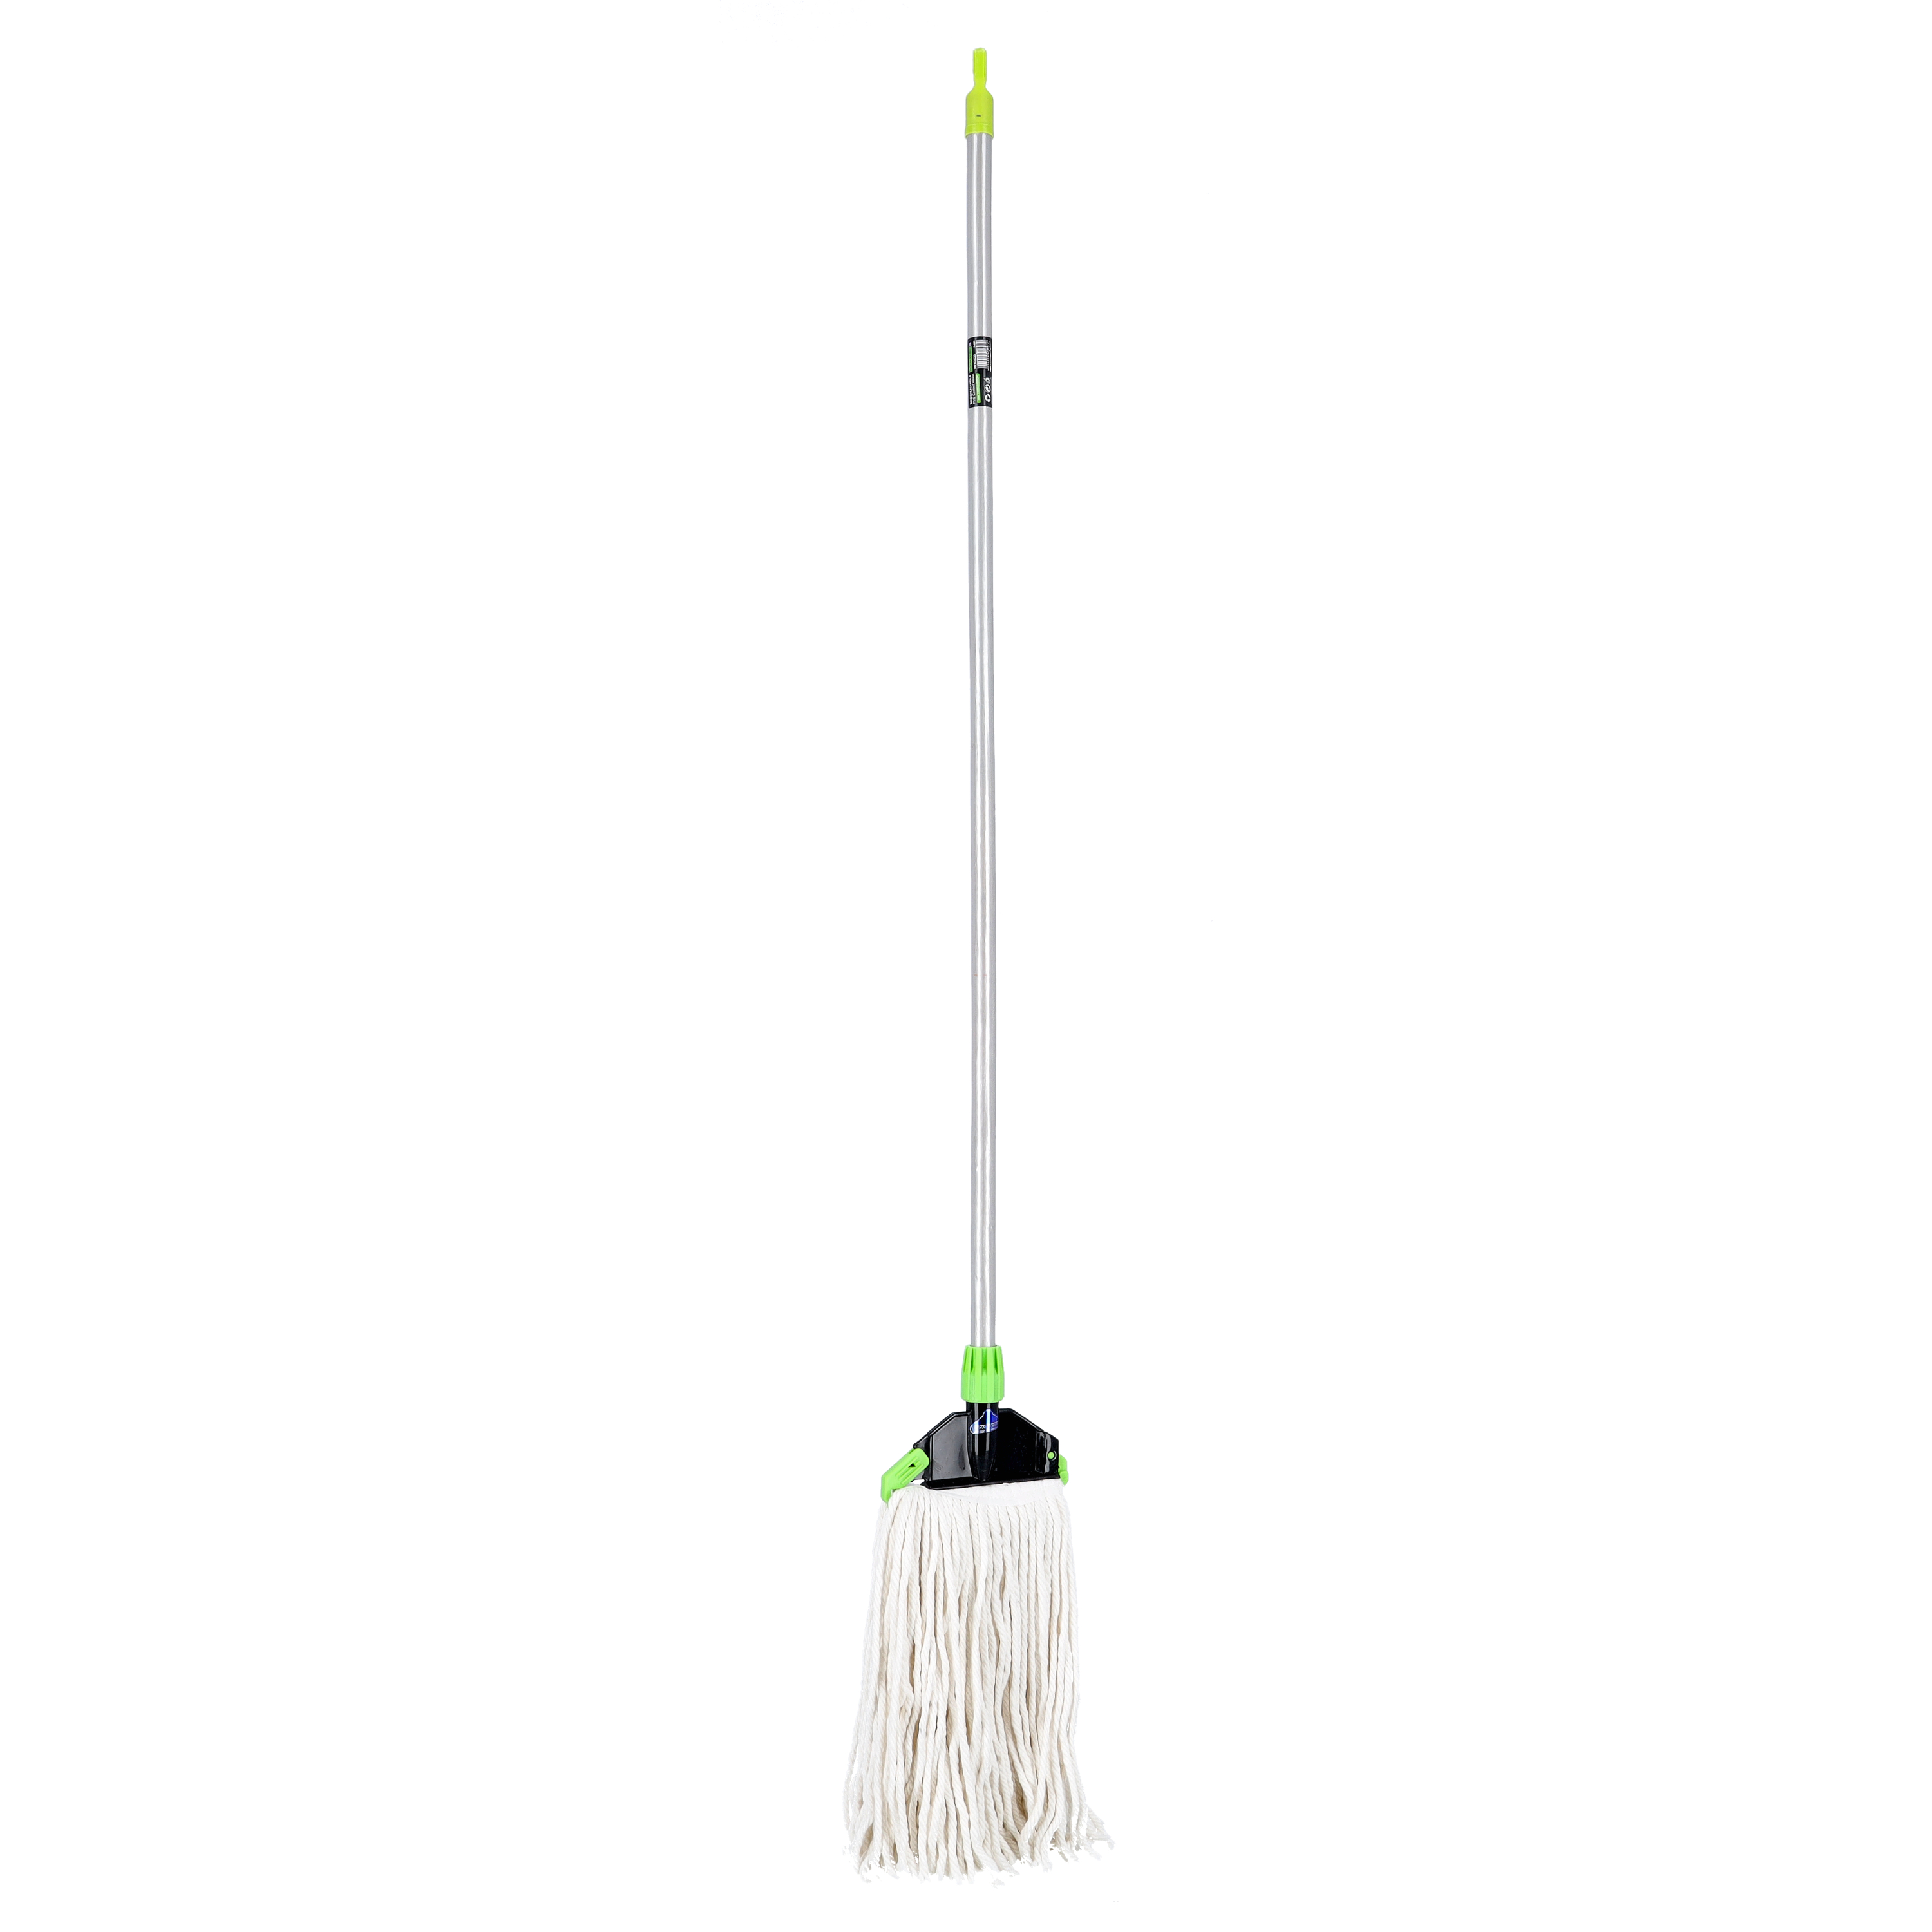 Royalford Microfiber Floor Mop, PVC Coated Wooden Handle, RF10102 - Super Absorbent 100% Microfiber Threads, For All Types Of Surfaces, Durable Design, Faster Dehydration, Highly Absorbent